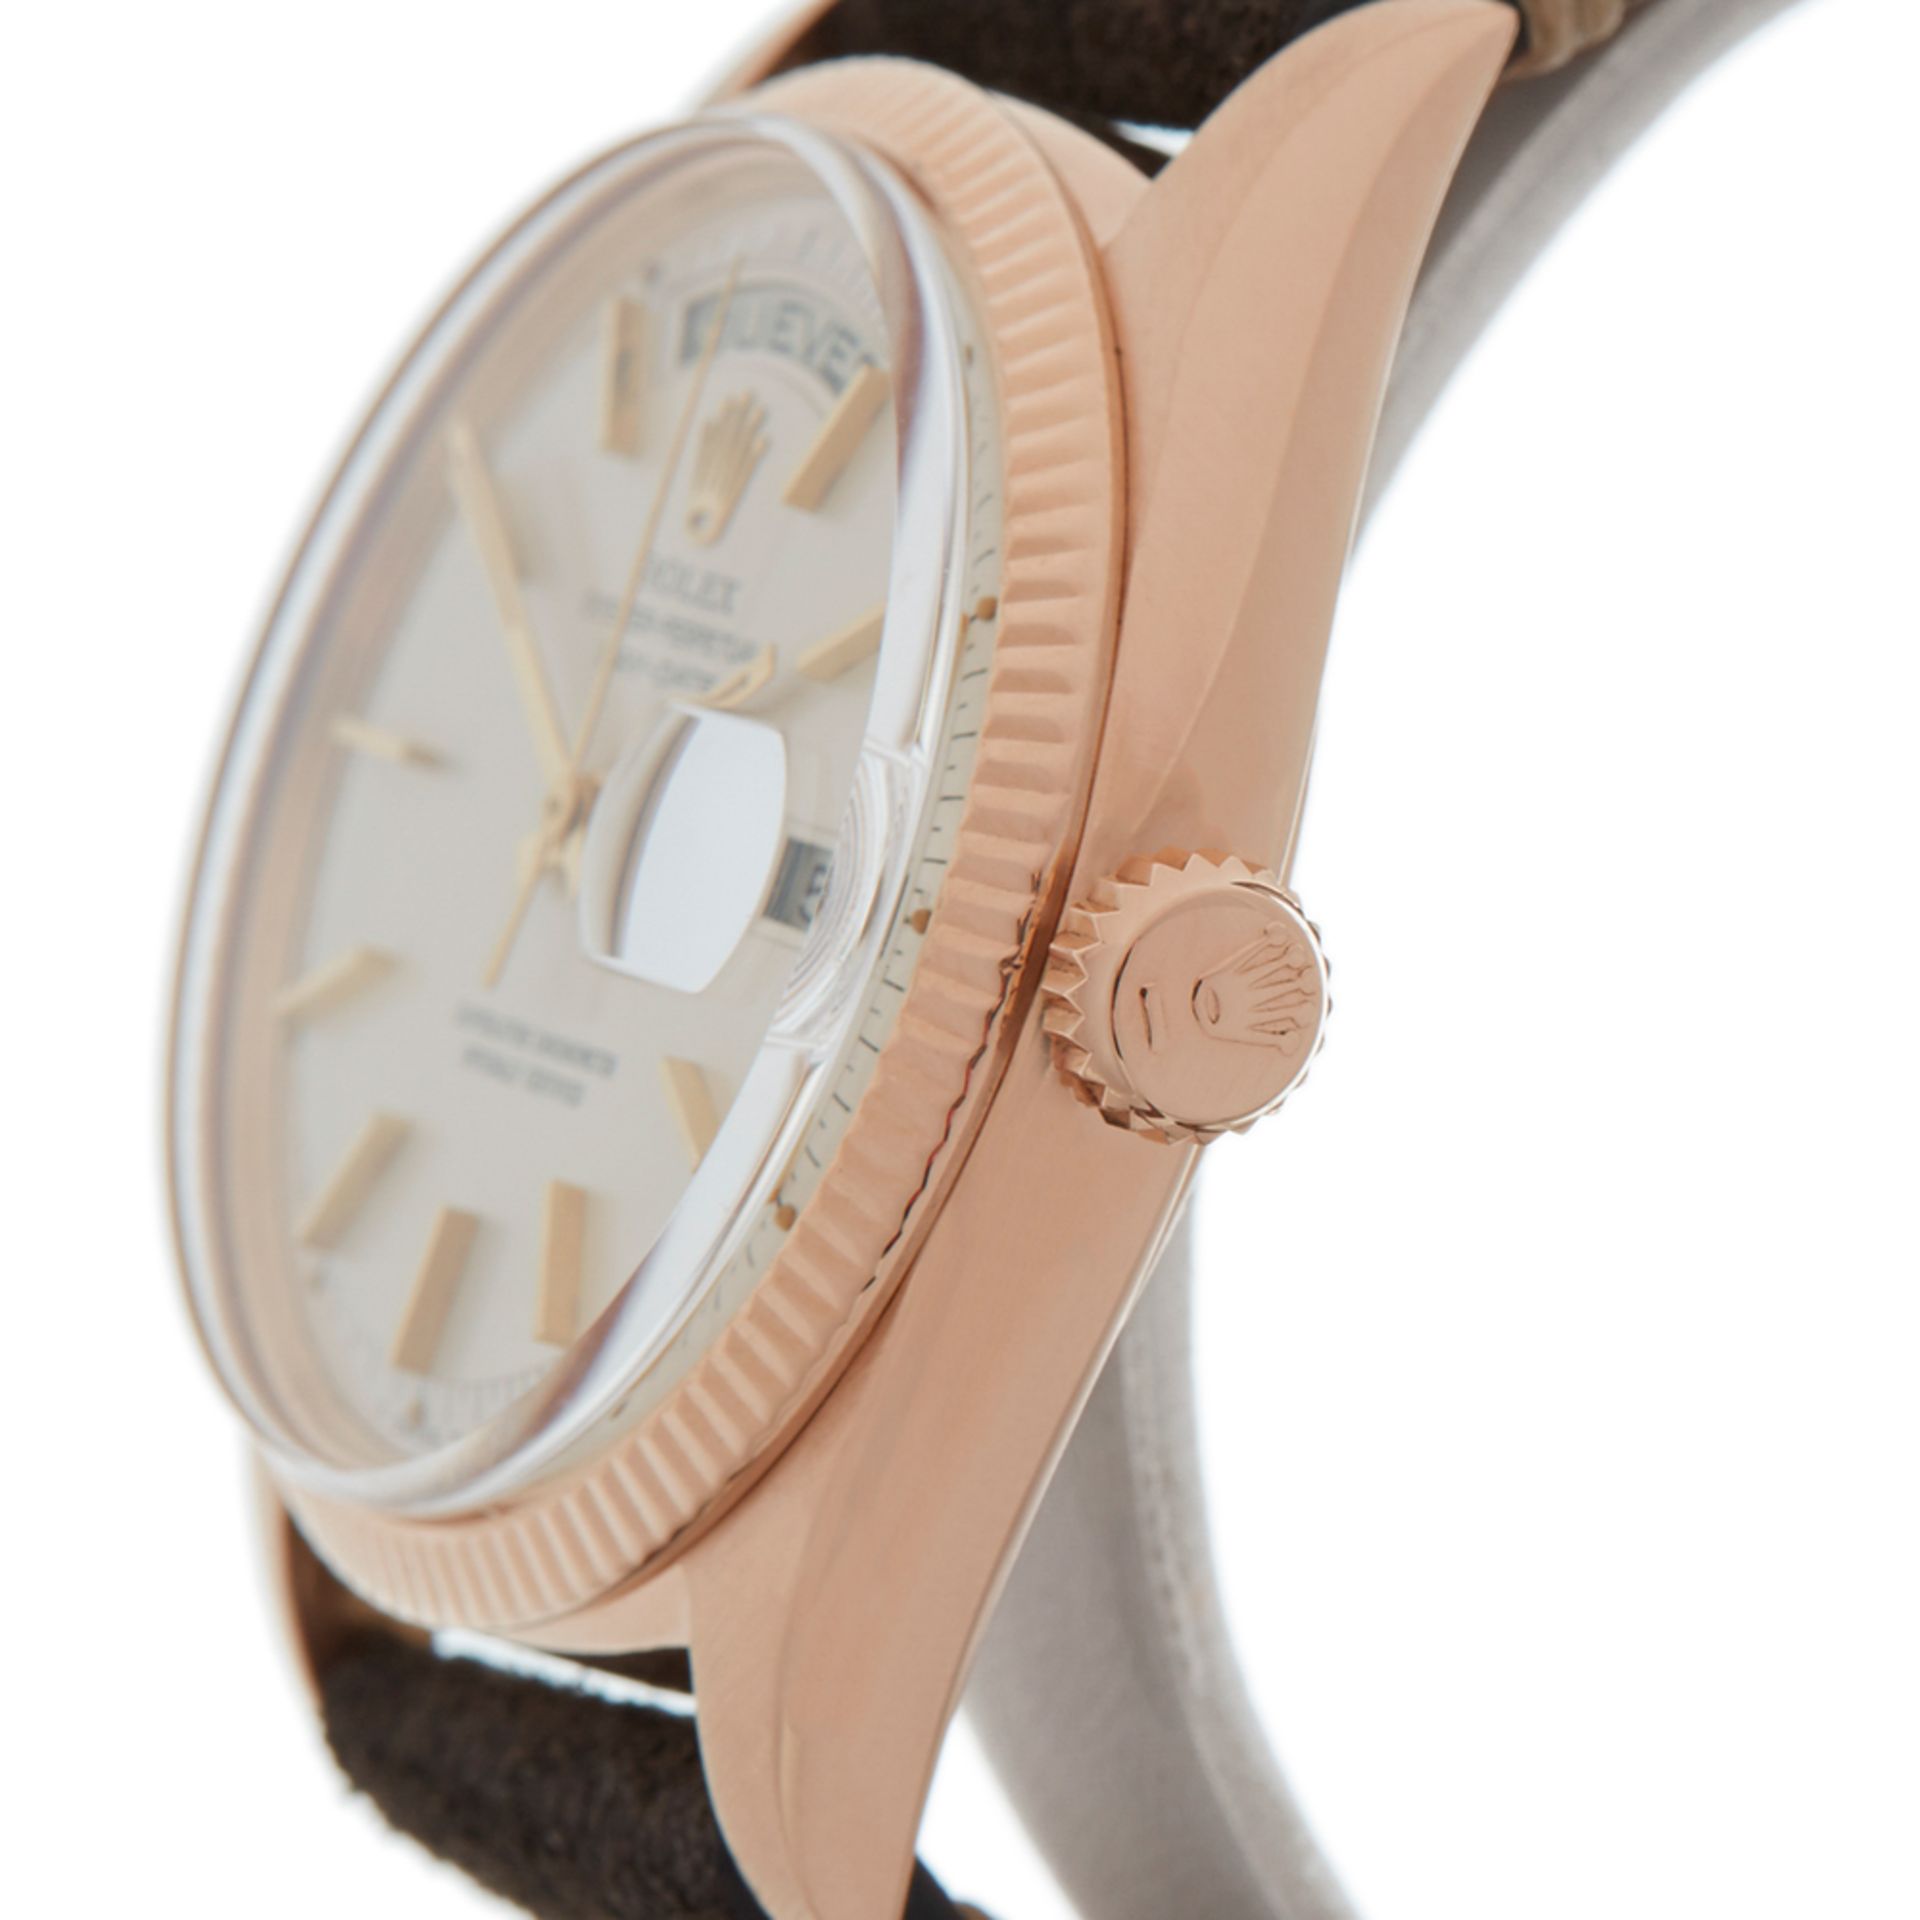 Day-Date 36mm 18K Rose Gold - 6611 - Image 4 of 8